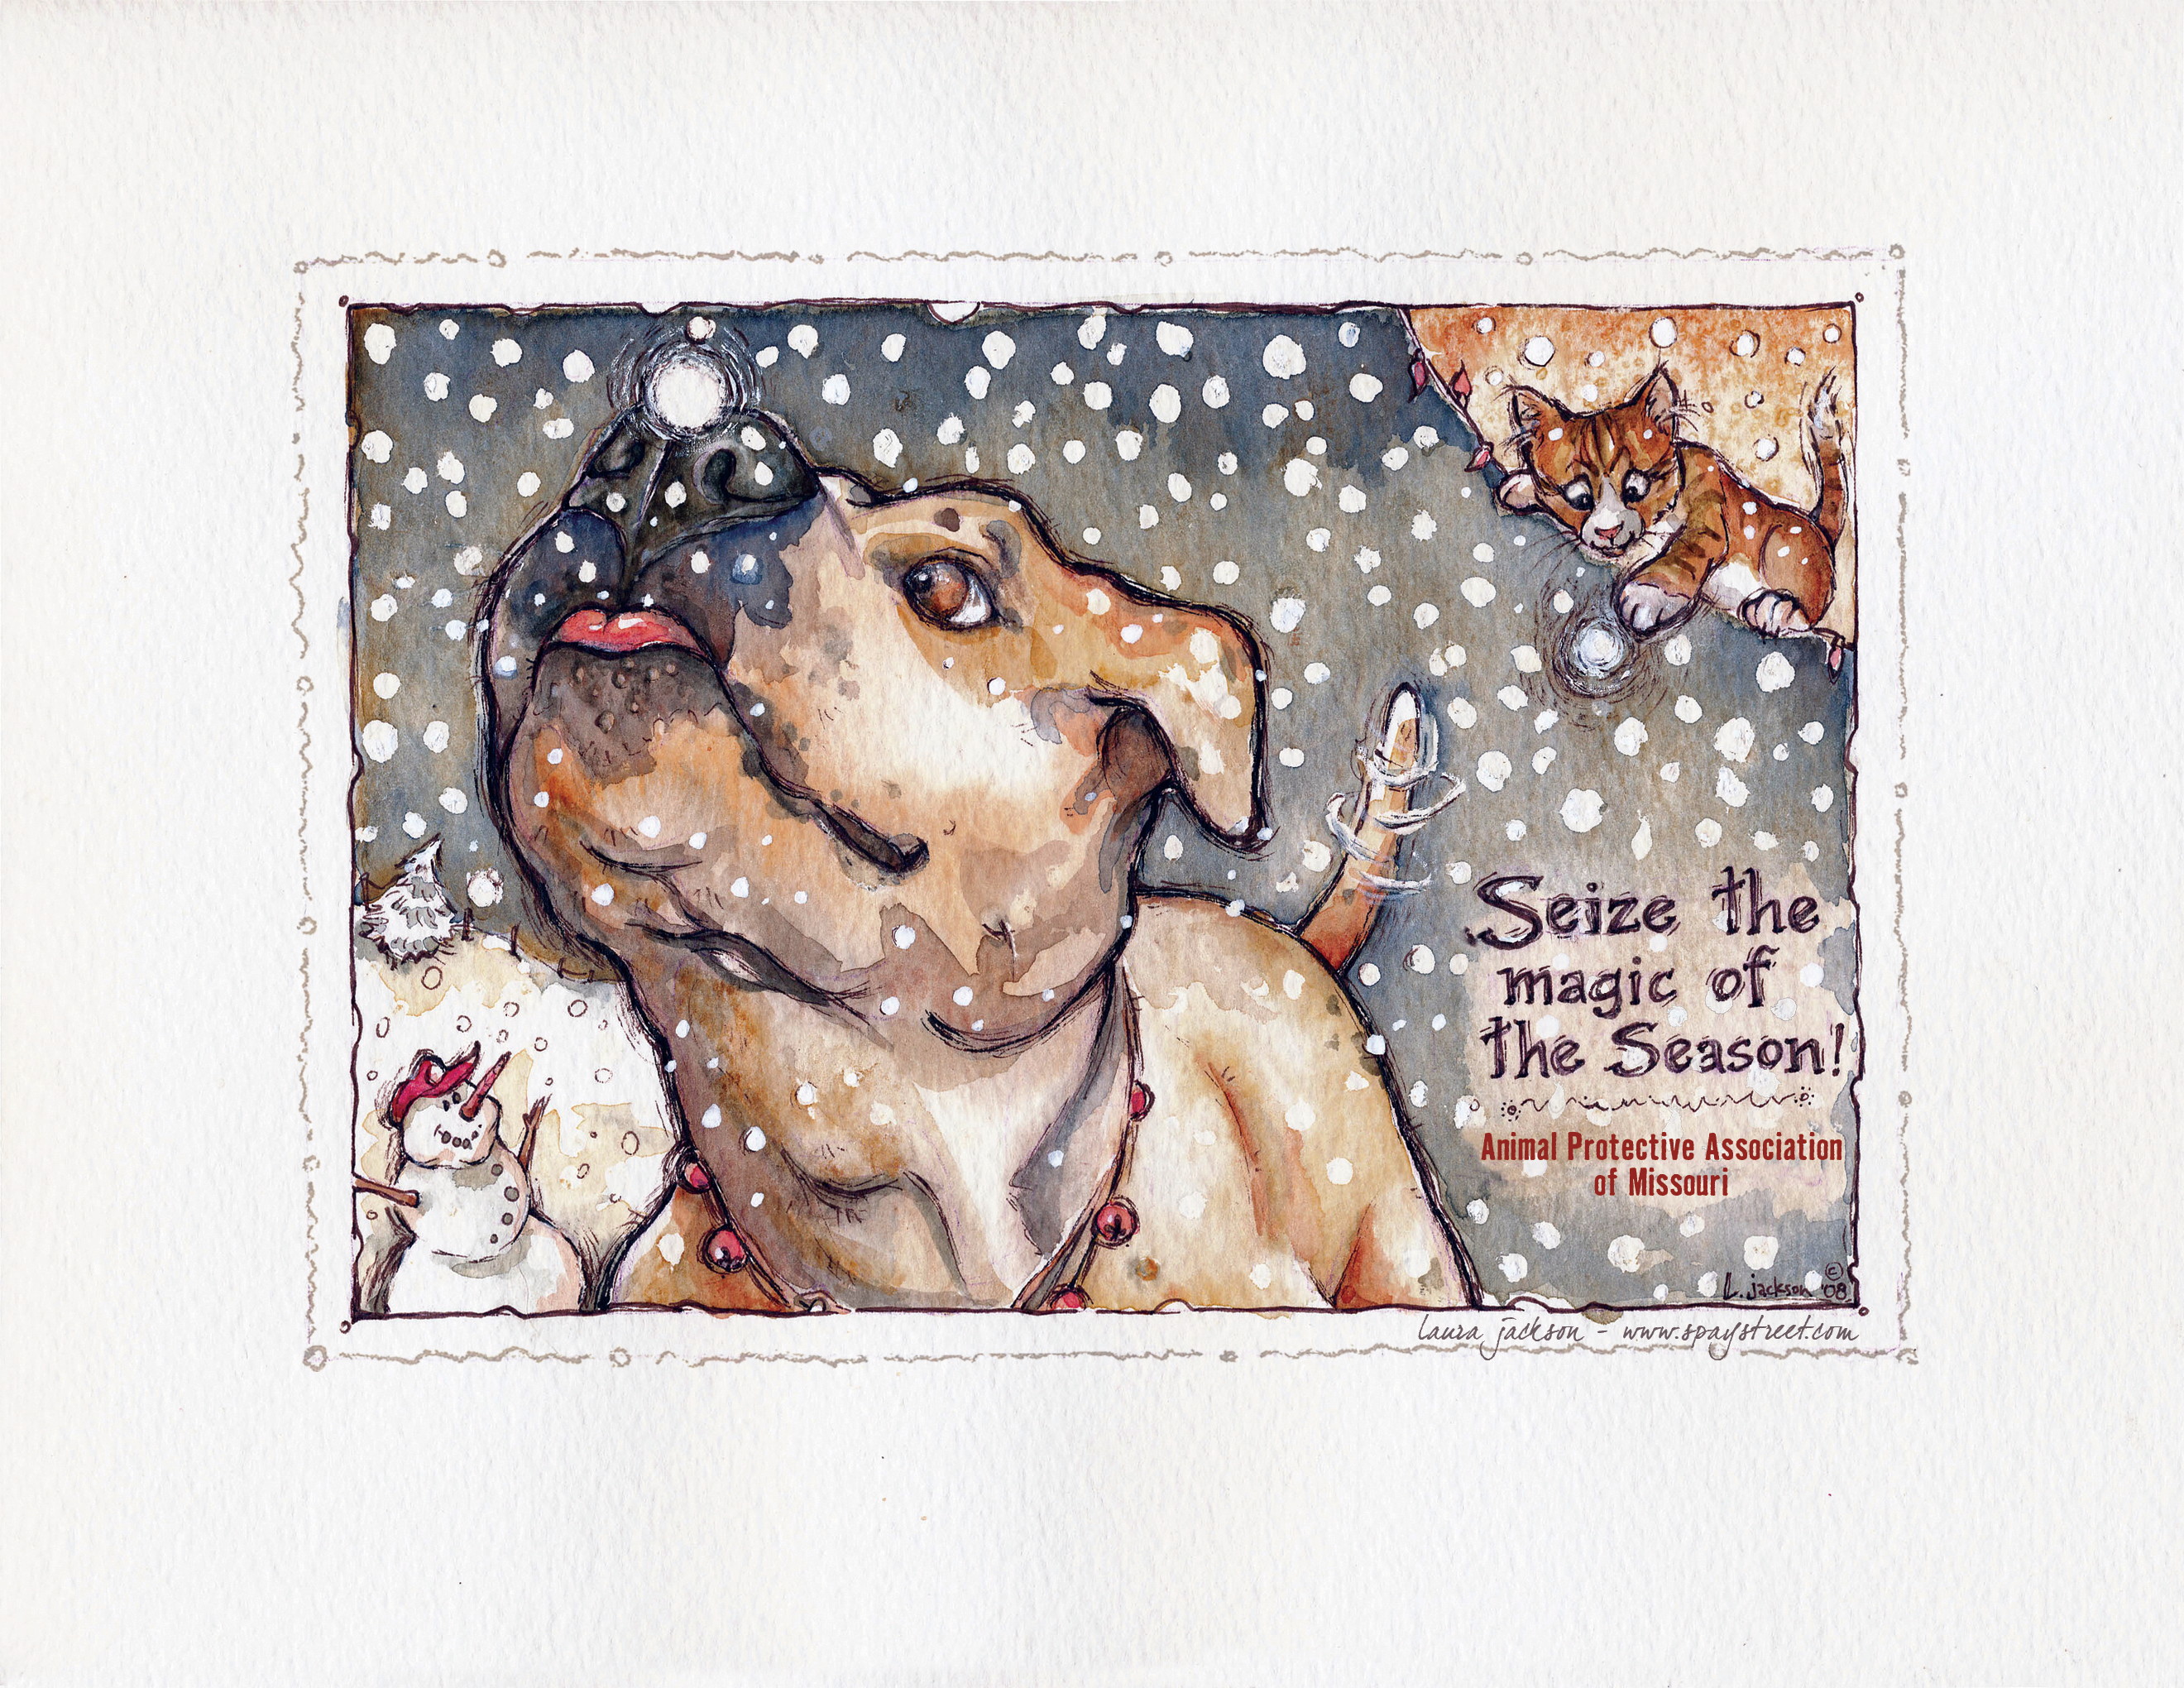 Animal Protective Association offers holiday cards and cookbook